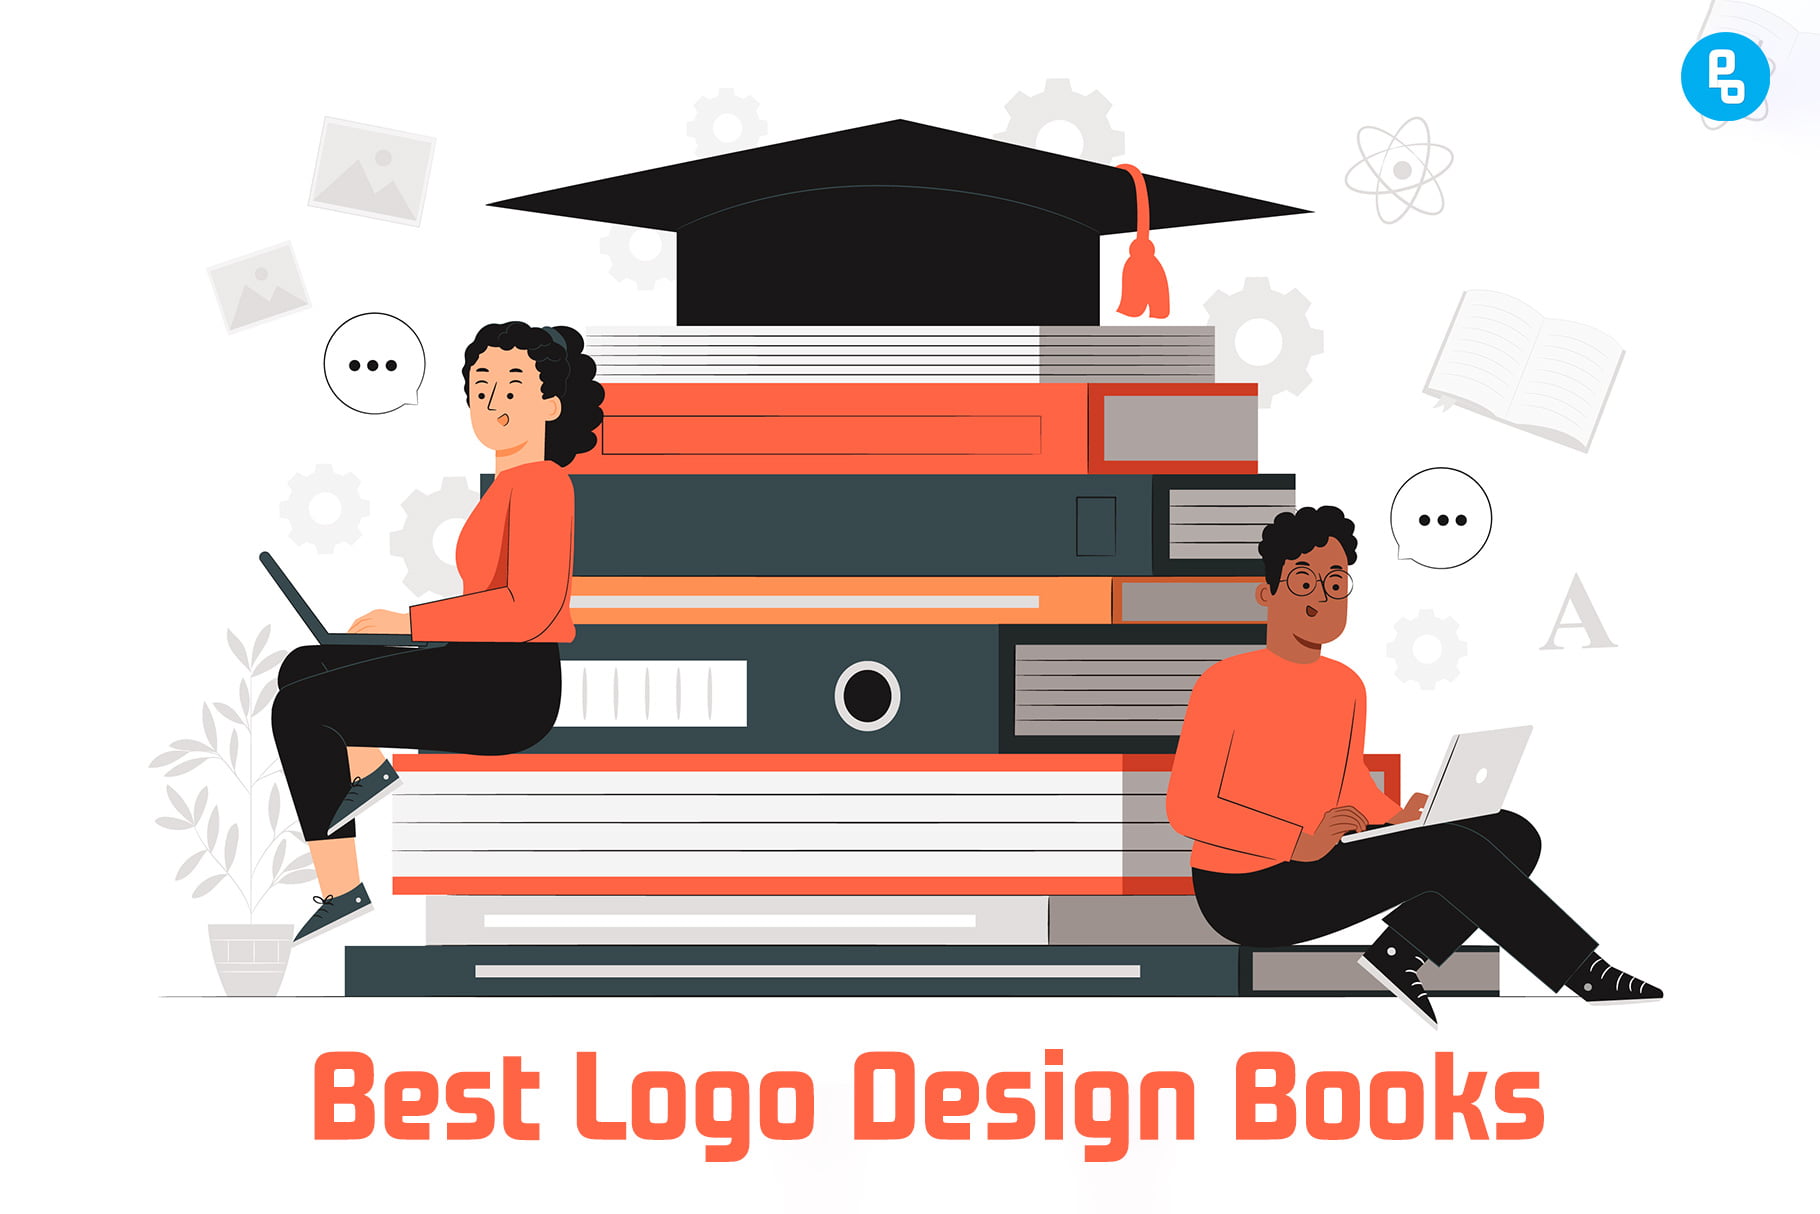 With so many books on logo design, it can be hard to know which ones are worth your time and money. Here we've rounded up 12 of the best books for logo designers in 2023.